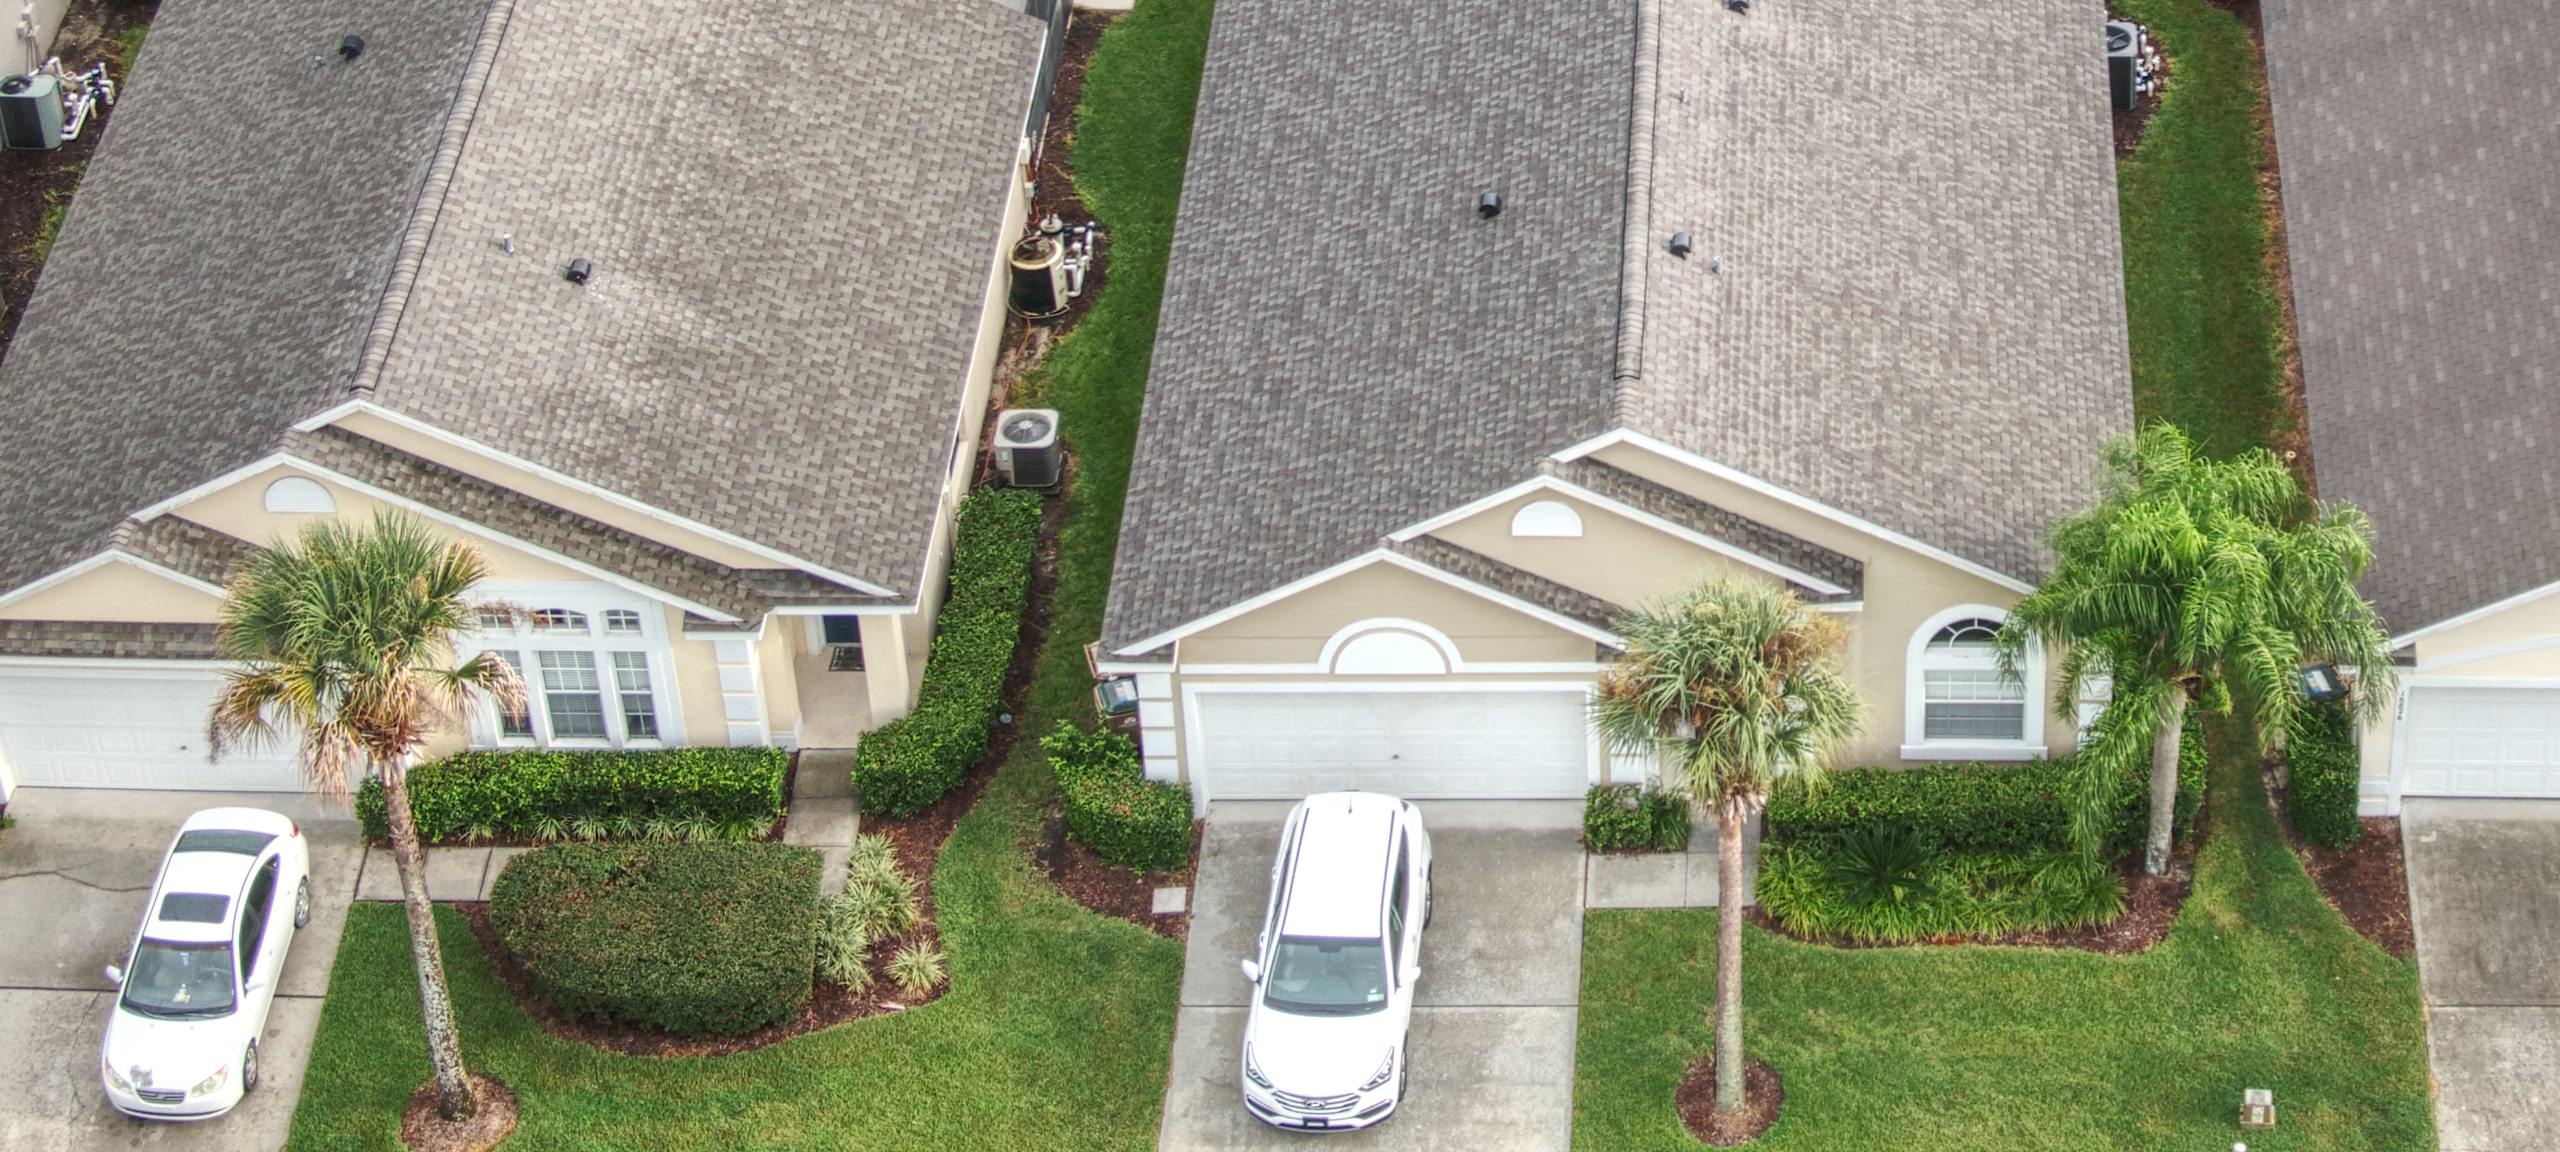 Aerial view of Orlando area homes with cars in driveways